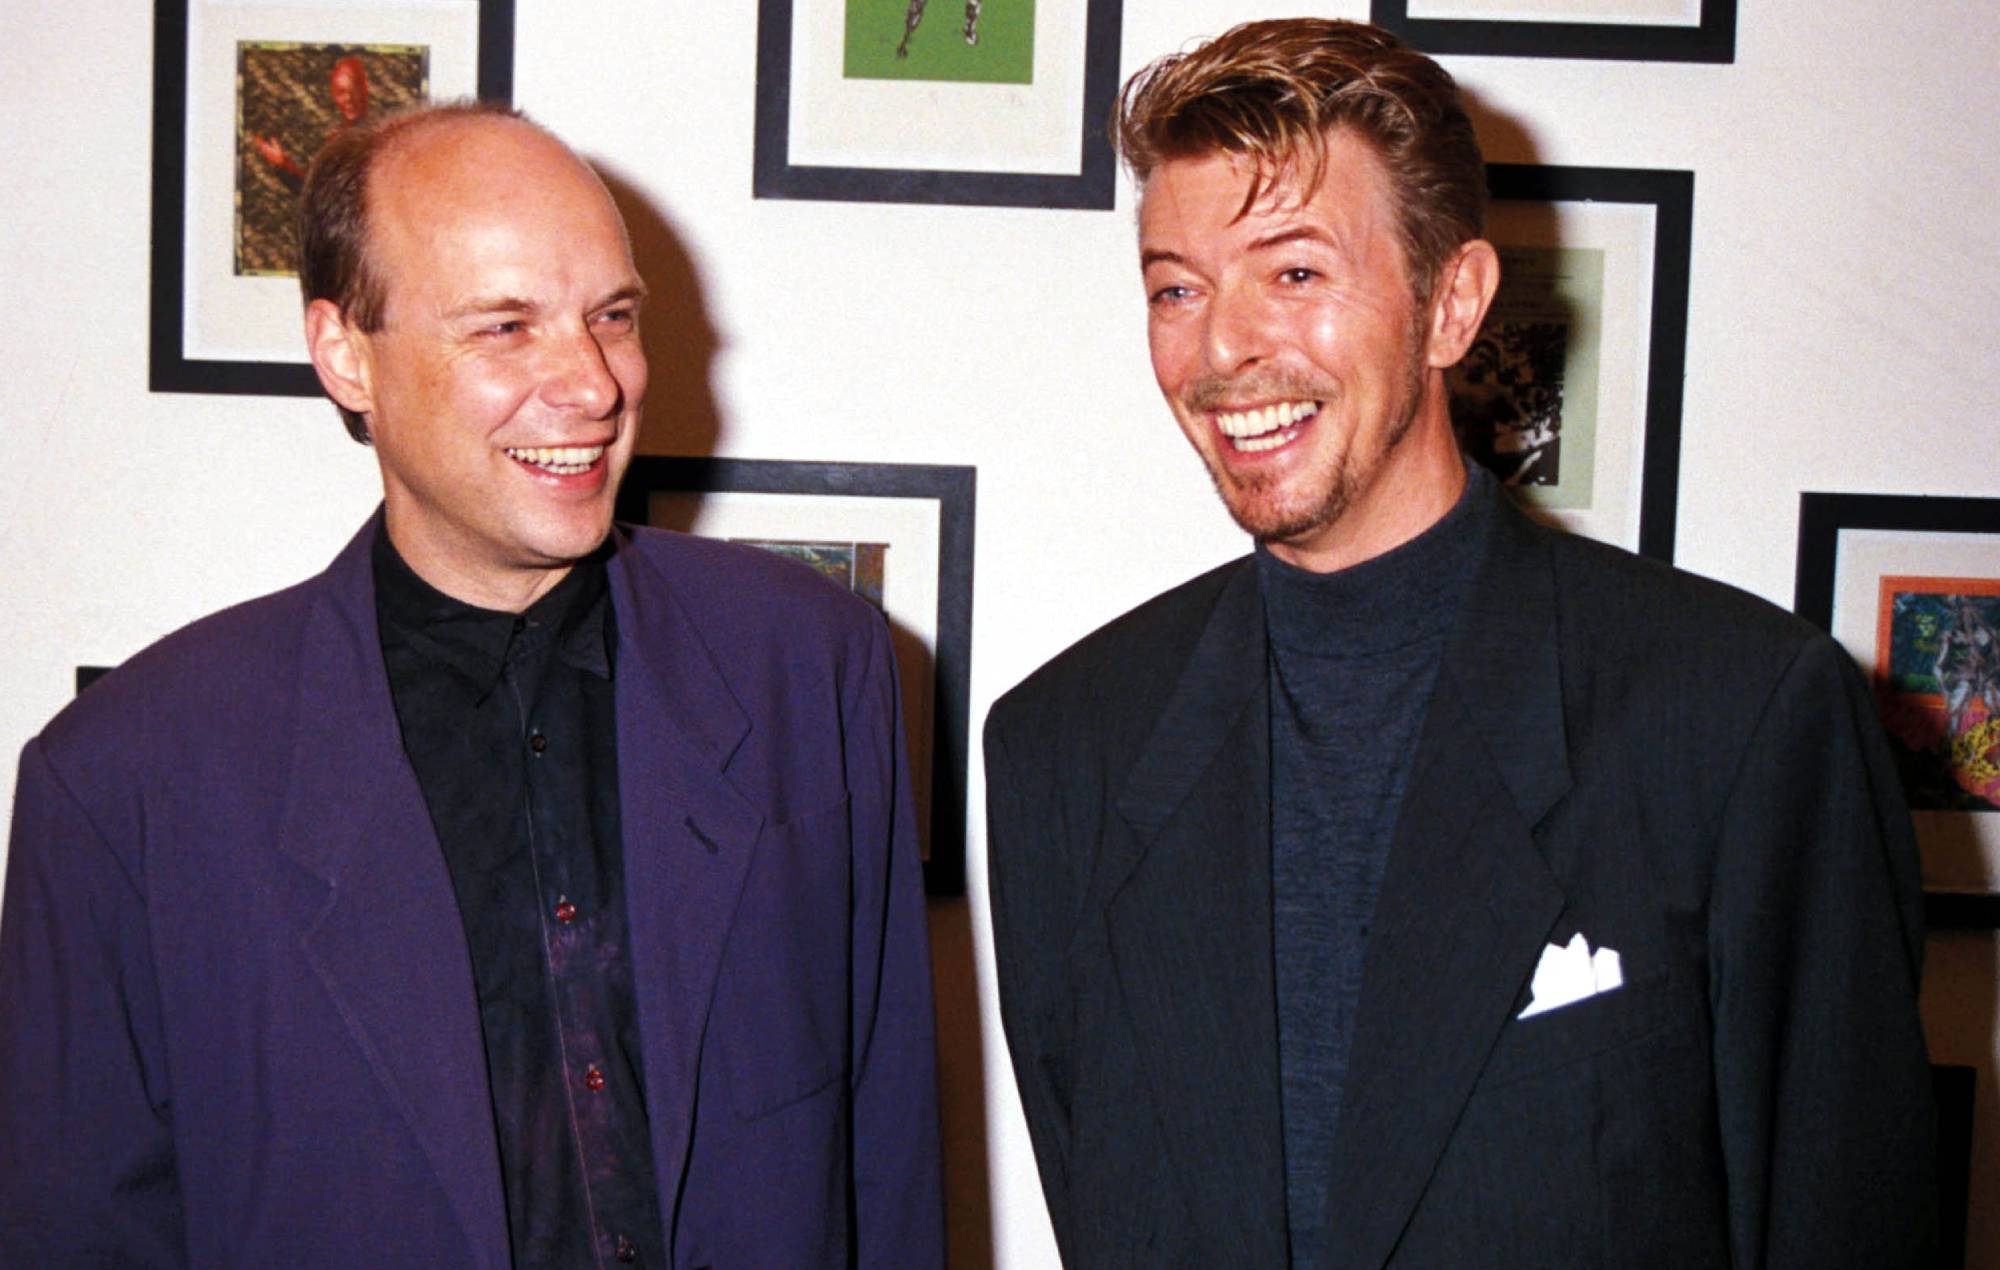 Brian Eno talks remixing David Bowie on "powerful" new release 'Get Real' to combat climate change